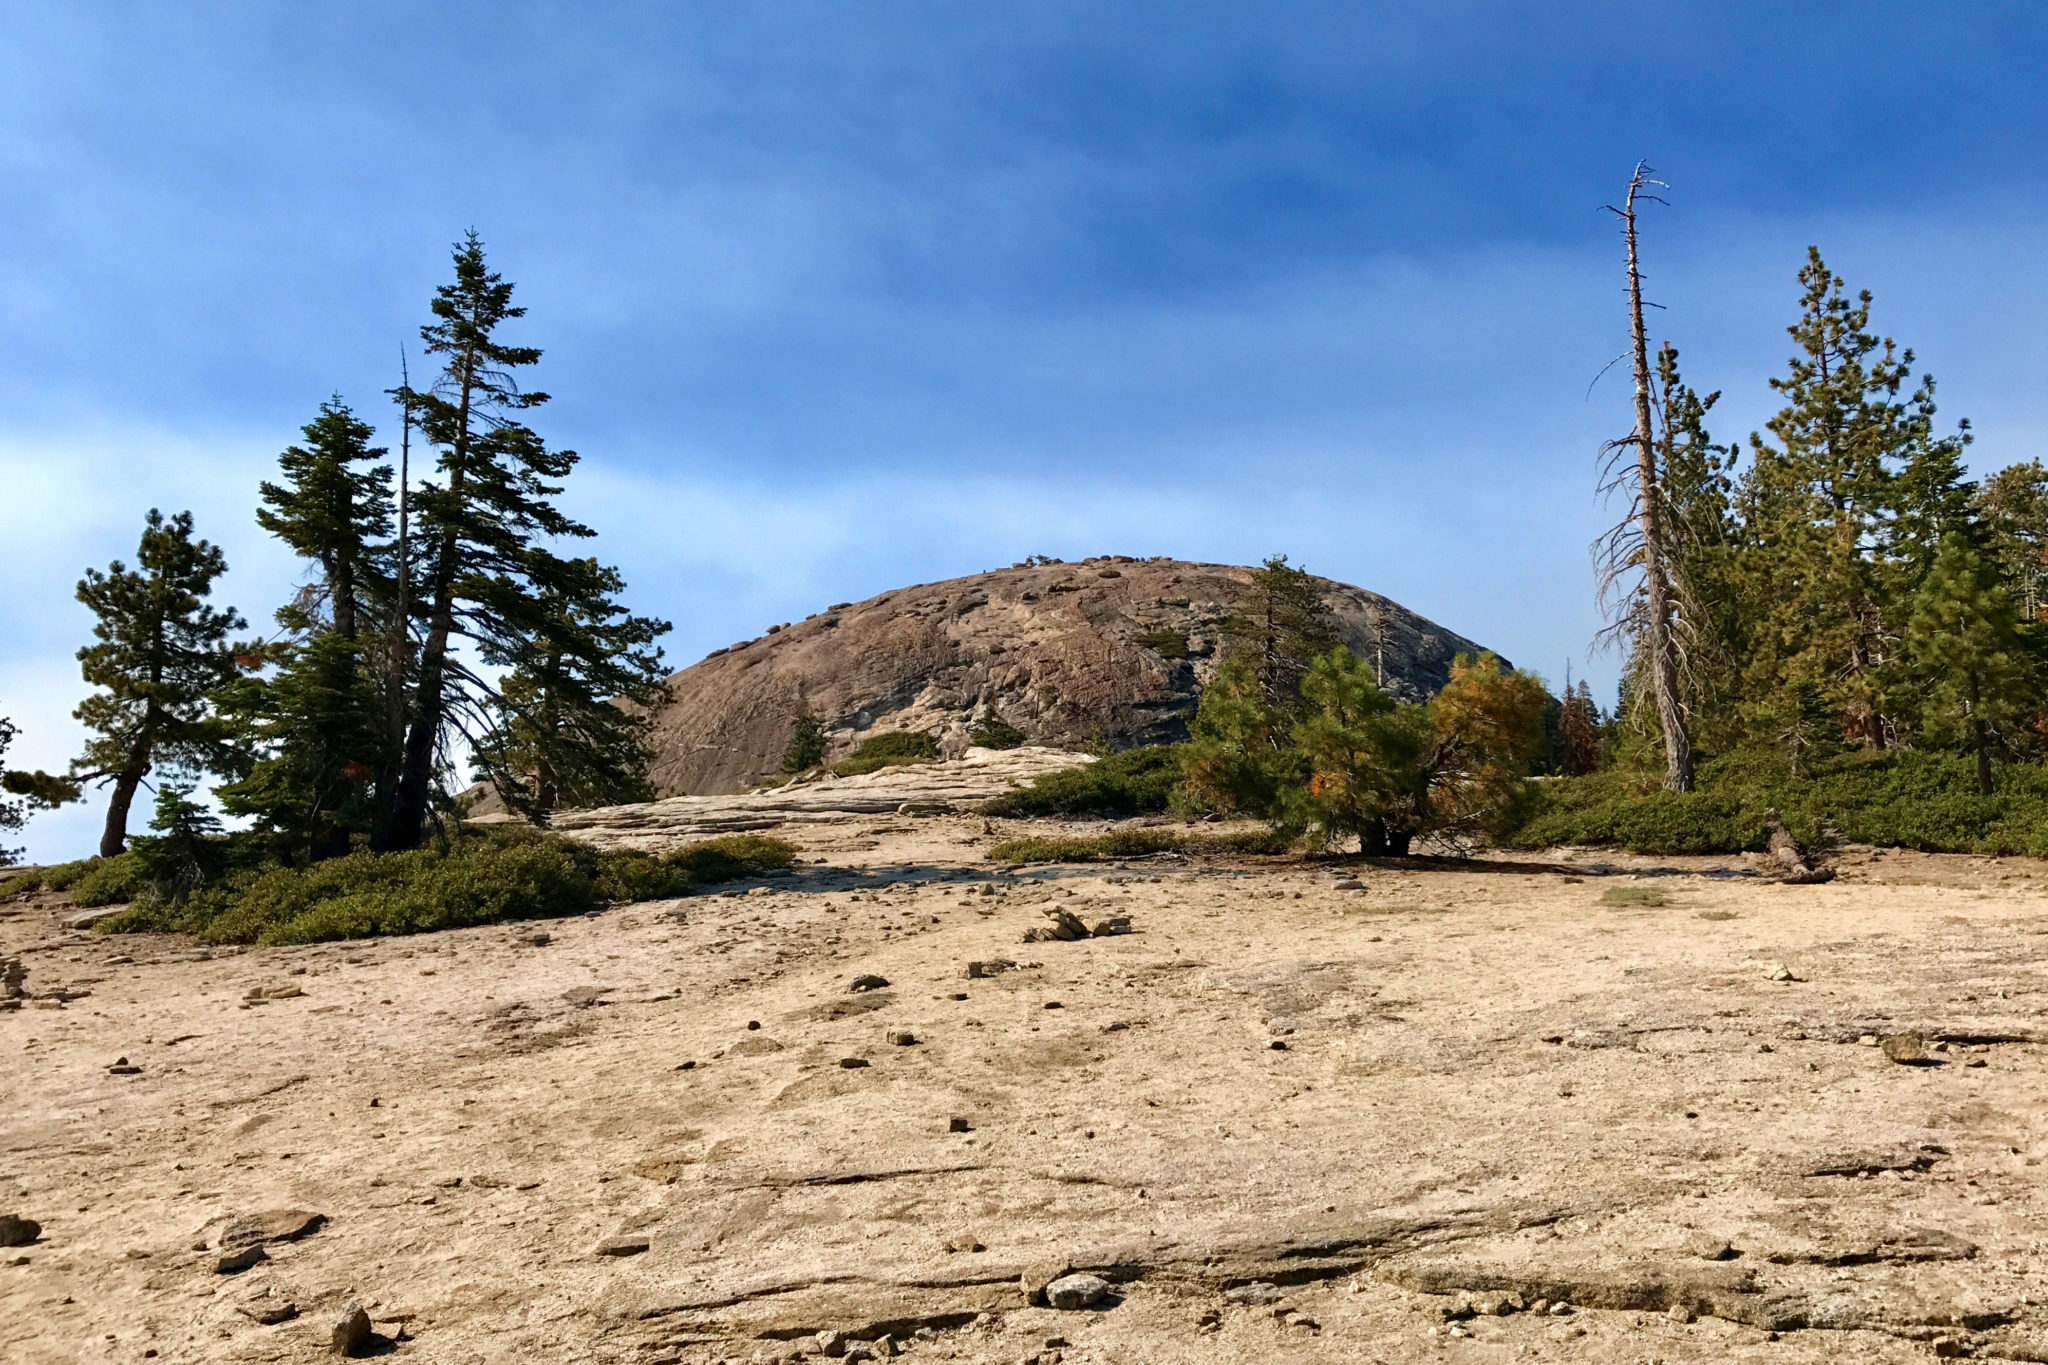 Getting closer to Sentinel Dome